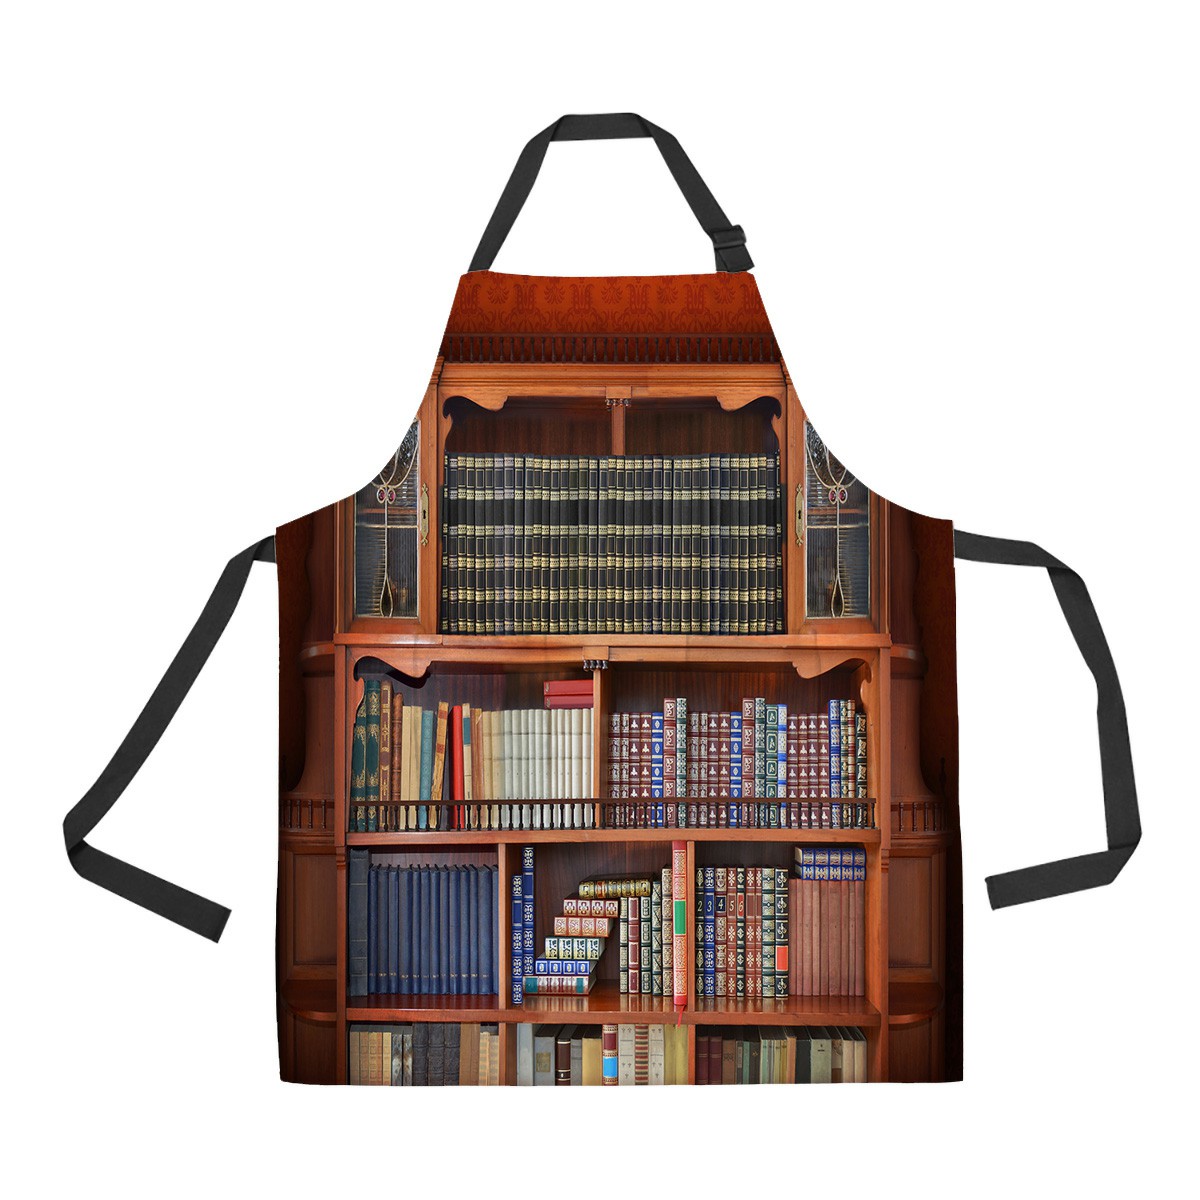 ECZJNT Classic Library Adjustable Bib Kitchen Apron with Pockets for Women Men - image 1 of 2